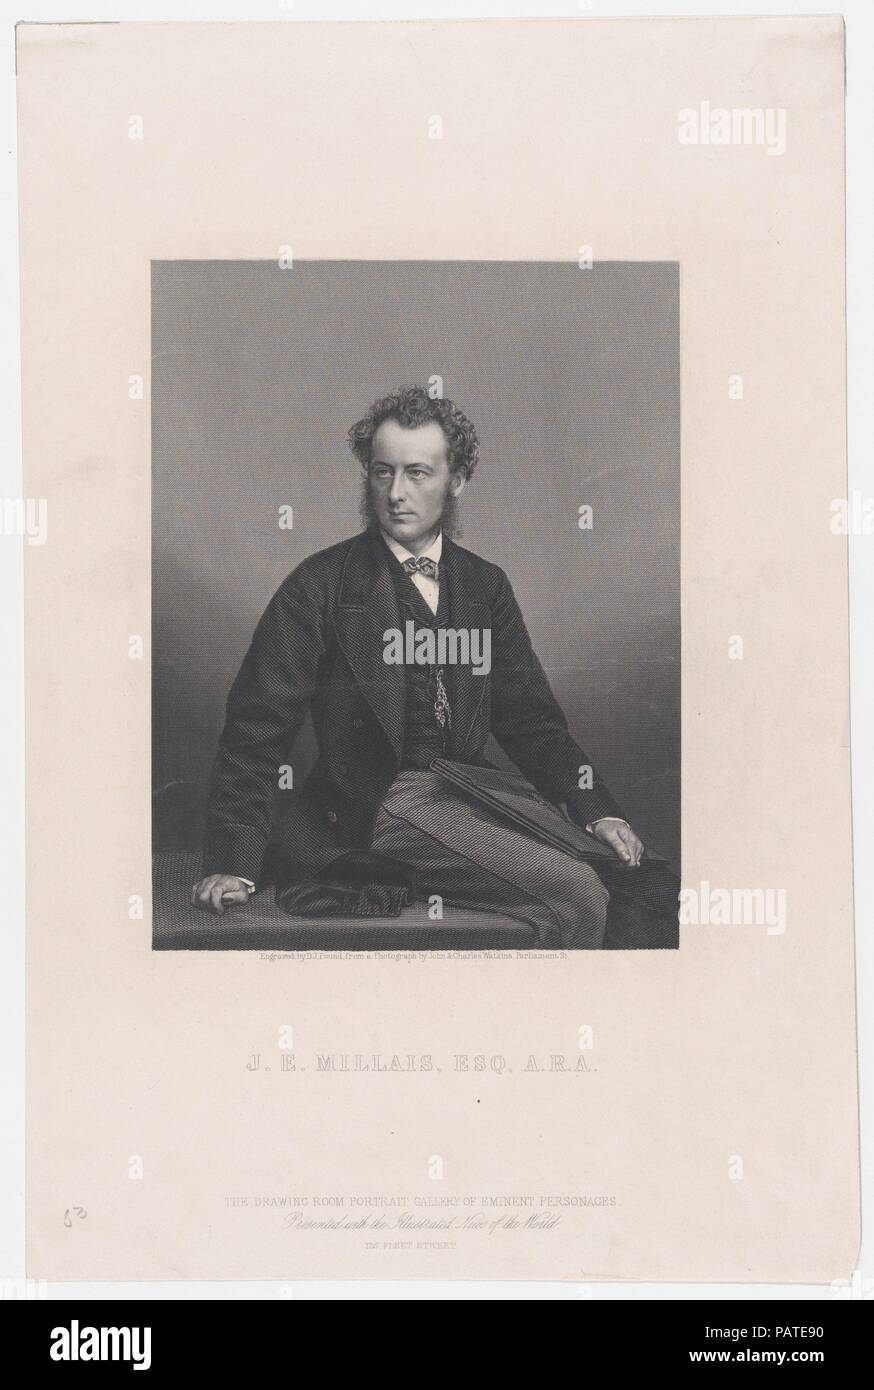 John Everett Millais, Esq., A.R.A. Dimensions: Sheet: 15 9/16 × 10 5/16 in. (39.5 × 26.2 cm). Engraver: Daniel John Pound (British, active 1850-60). Photographer: After John and Charles Watkins (British, active 1867-71). Series/Portfolio: The Drawing Room Portrait Gallery of Eminent Personages. Sitter: Sir John Everett Millais (British, Southampton 1829-1896 London). Date: 1859.  Based on a photograph, this engraving shows the artist at thirty. A child prodigy, Millais had entered the Royal Academy Schools at eleven, then in 1848 helped launch the Pre-Raphaelite Brotherhood and found himself a Stock Photo